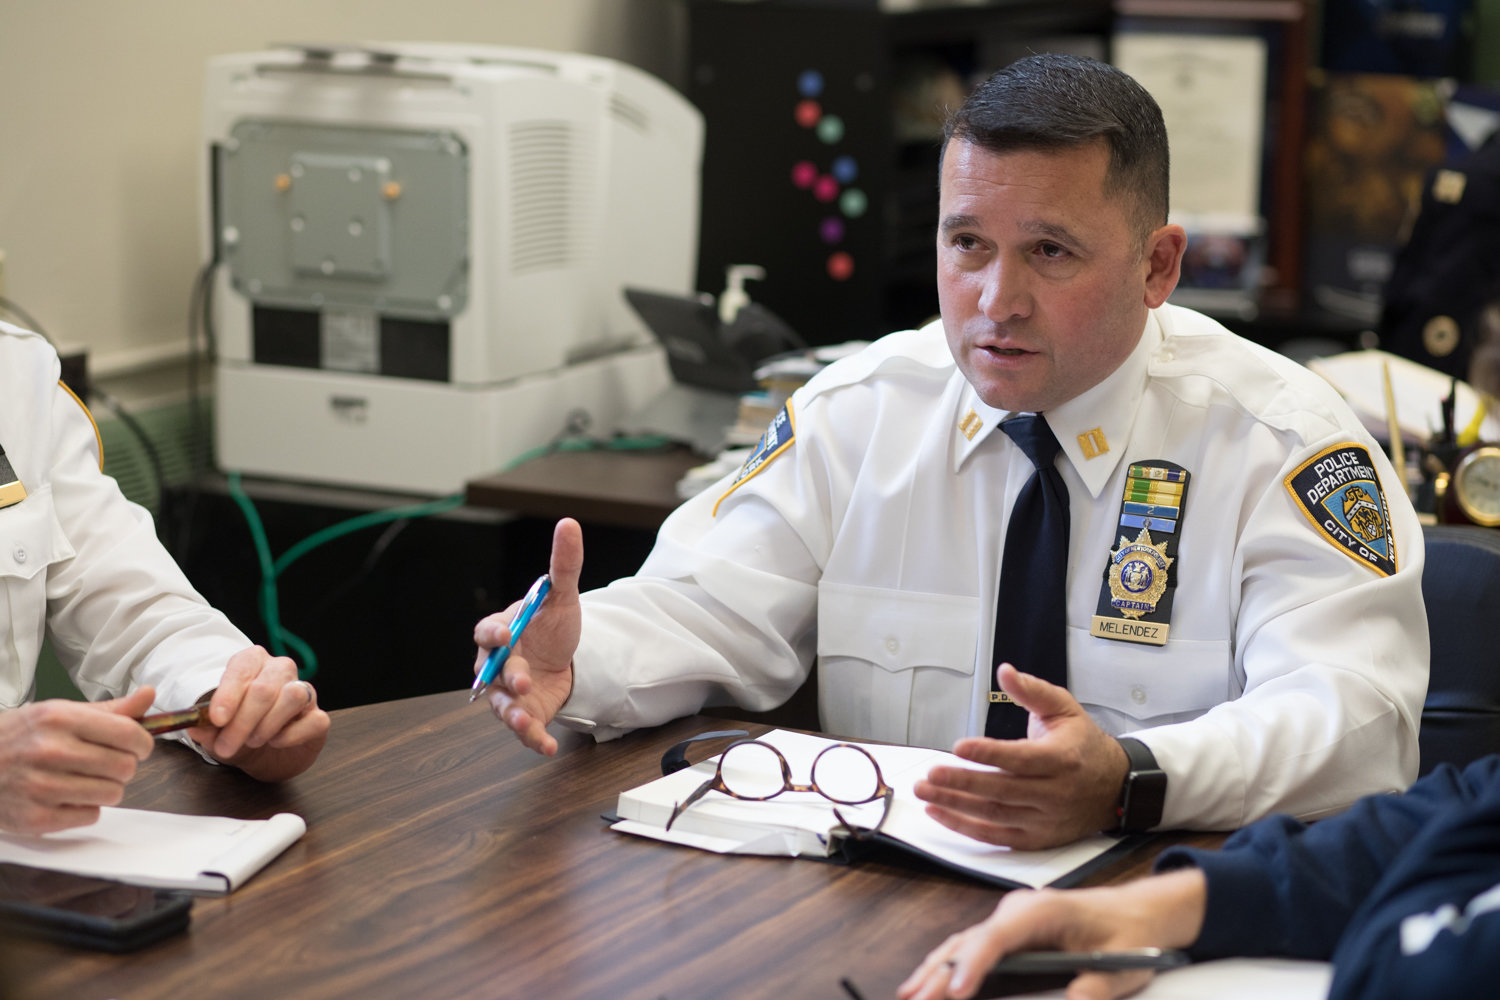 Commanding officers like the 50th Precinct’s Emilio Melendez will now have to contend with the fact that the New York Police Department’s disciplinary records are no longer secret, thanks to the repeal of Section 50-a, a law that previously kept such records under wraps.